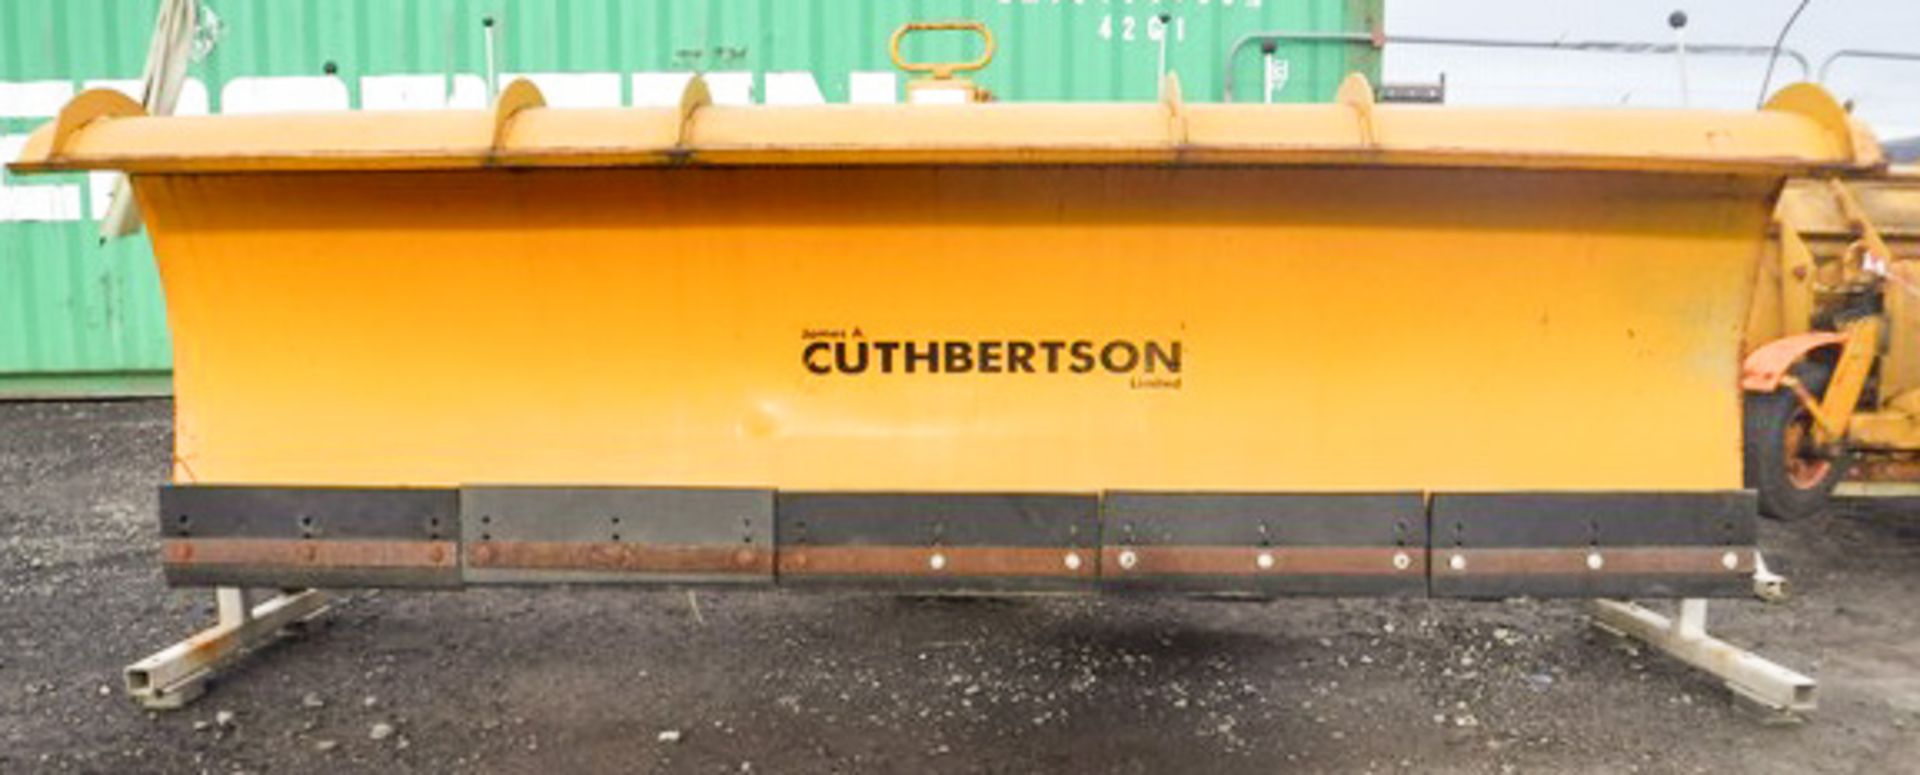 10FT X 4FT CUTHBERTSON SNOW PLOUGH BLADE, LORRY MOUNTED, S/N 44/06, ASSET 3237